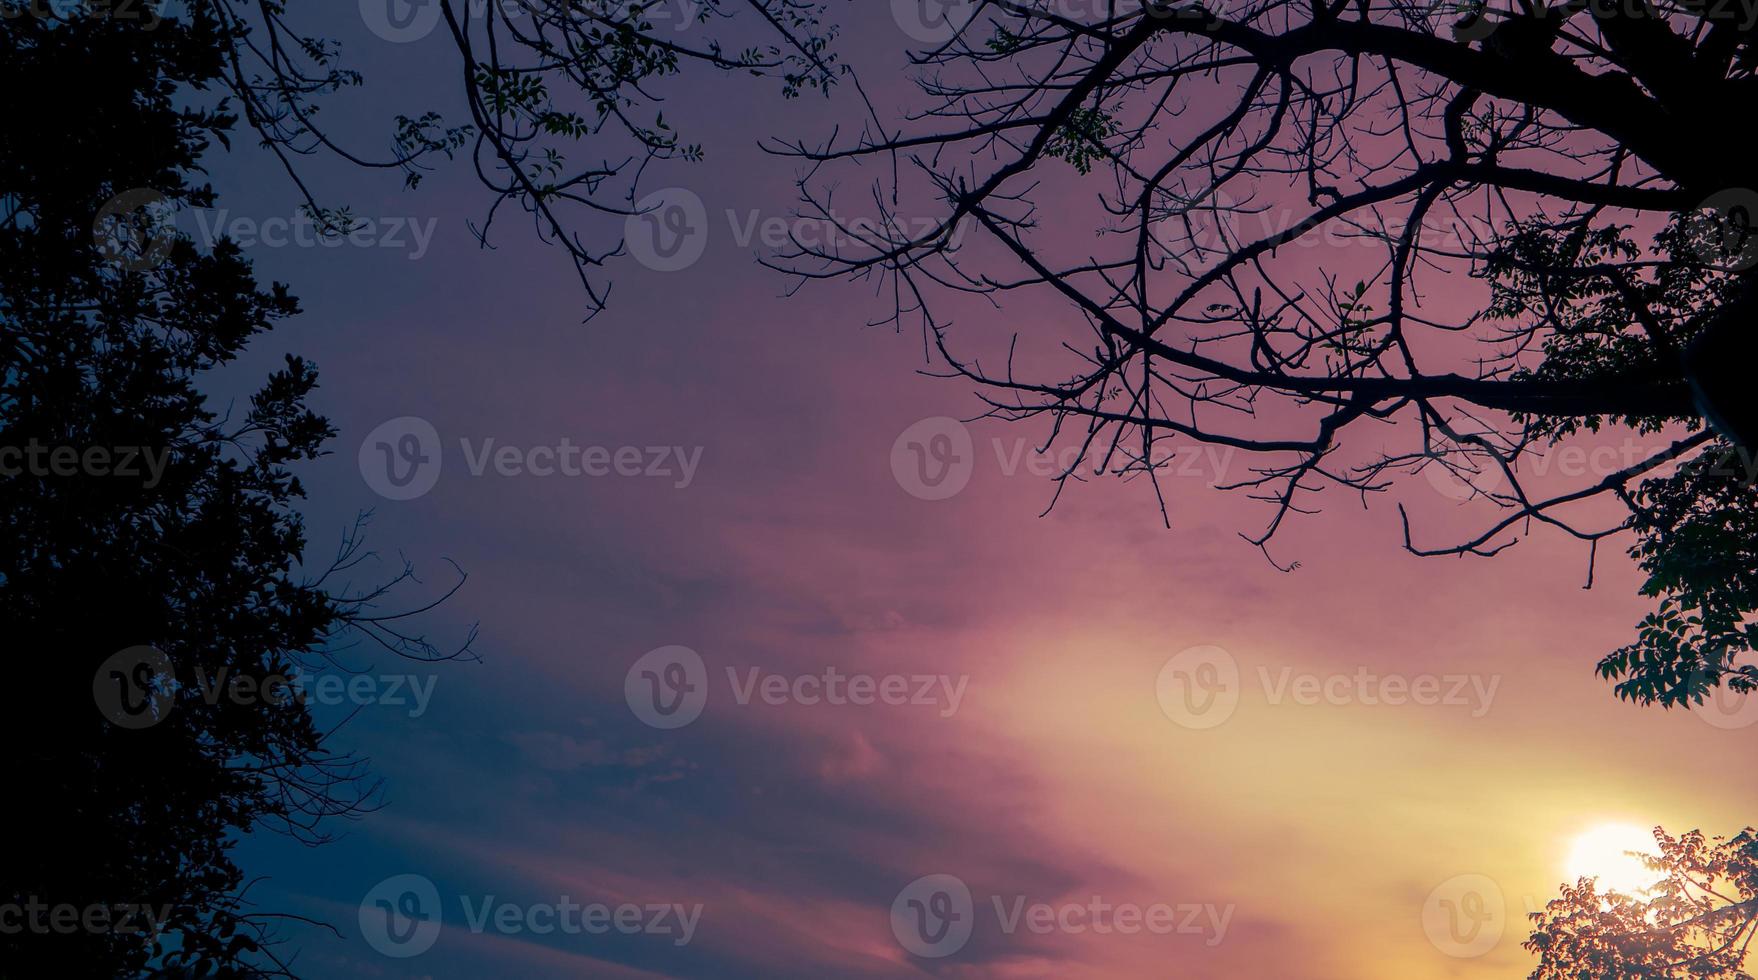 Evening sky nature background with tree branches silhouette photo